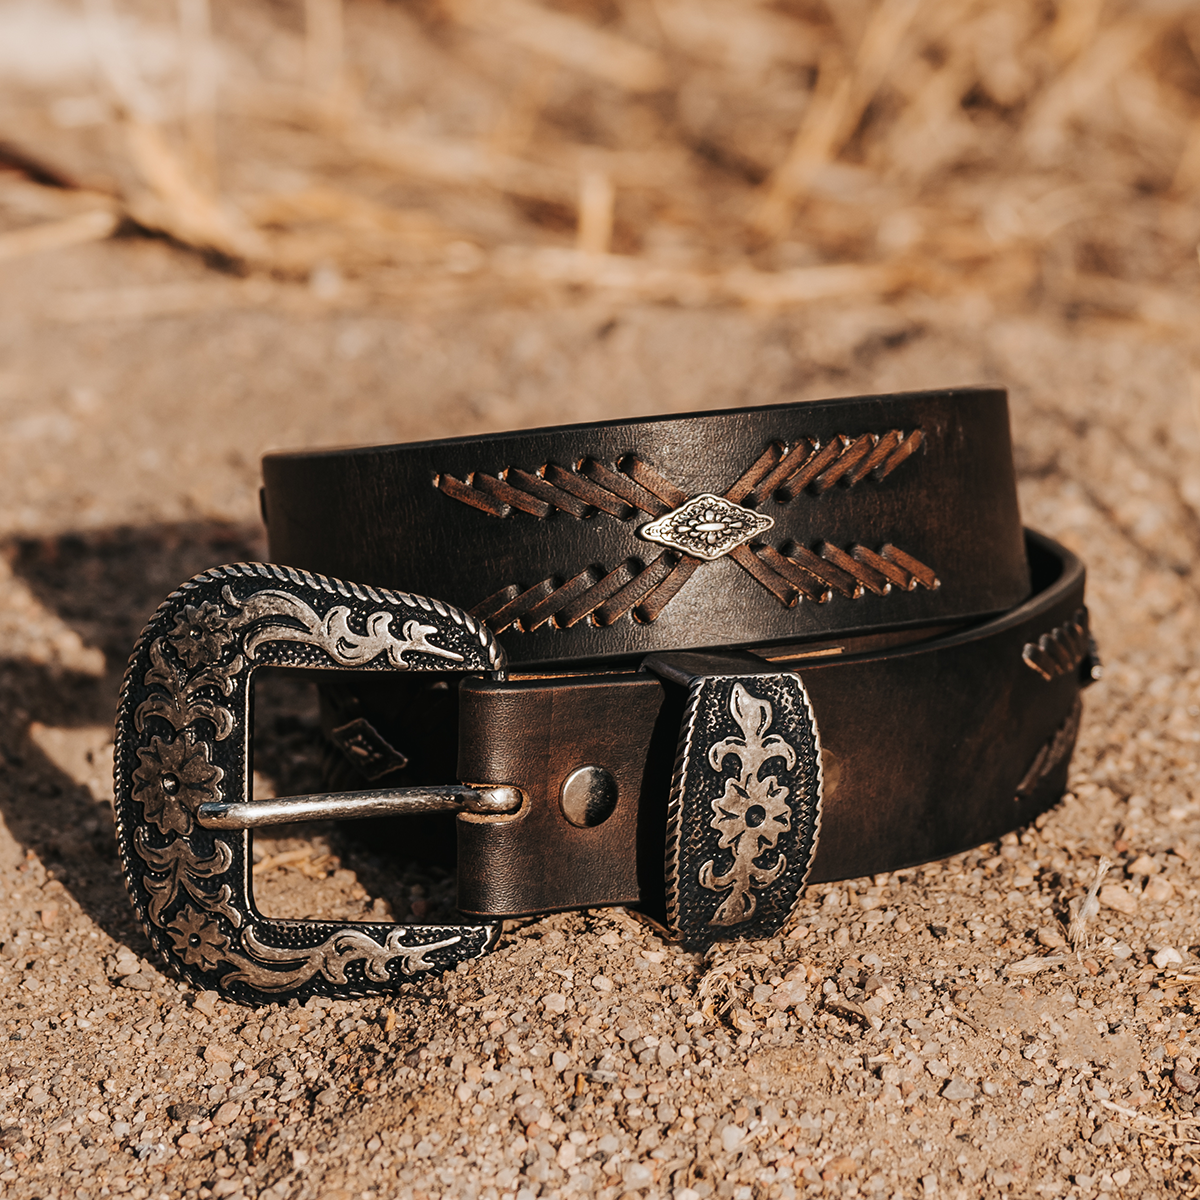 FREEBIRD Westbound black distressed full grain leather belt featuring embroidered leather detailing and engraved hardware lifestyle